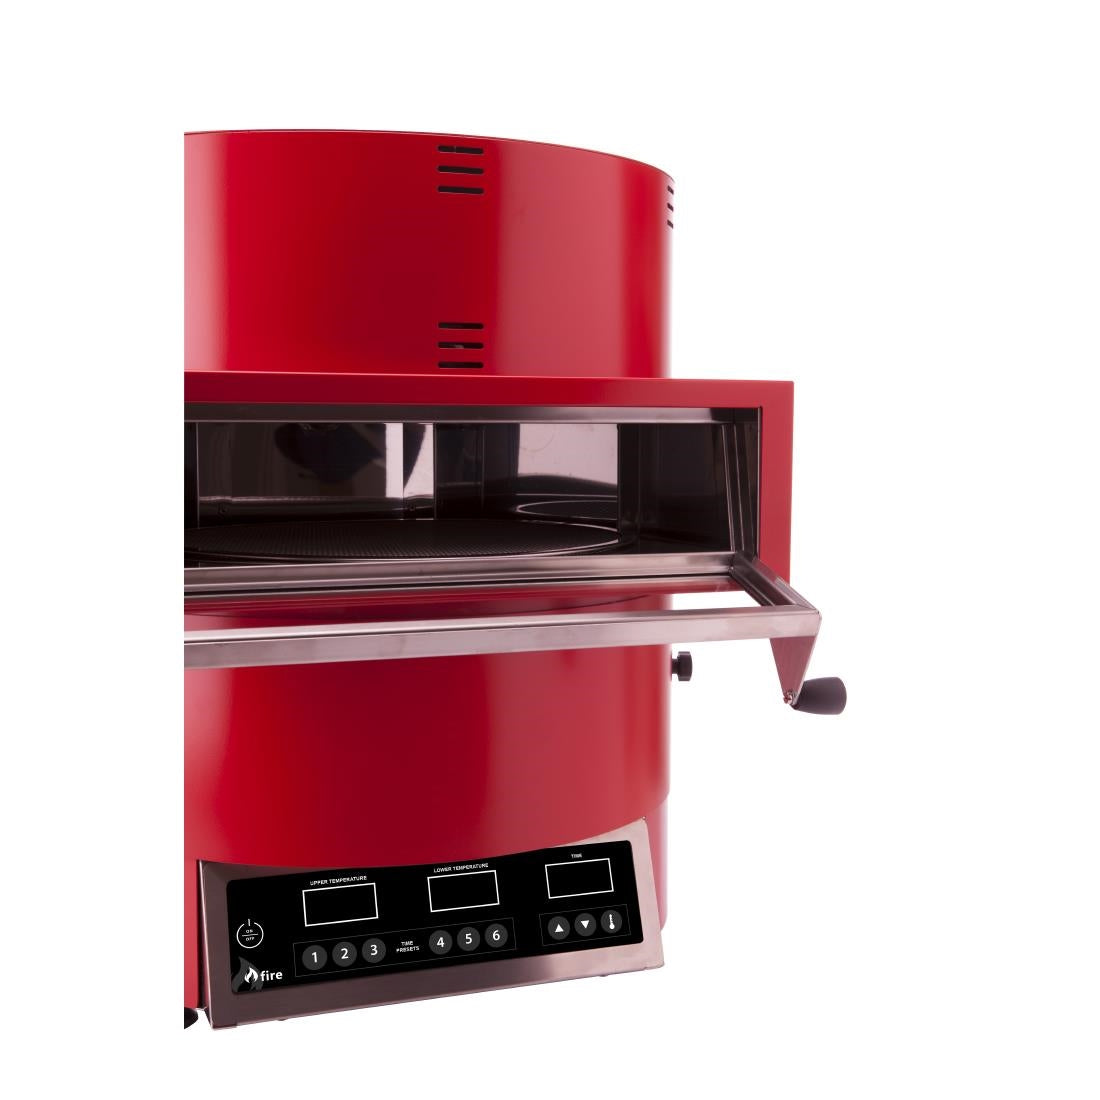 DB873-1PH Turbochef Fire Pizza Oven Single Phase JD Catering Equipment Solutions Ltd